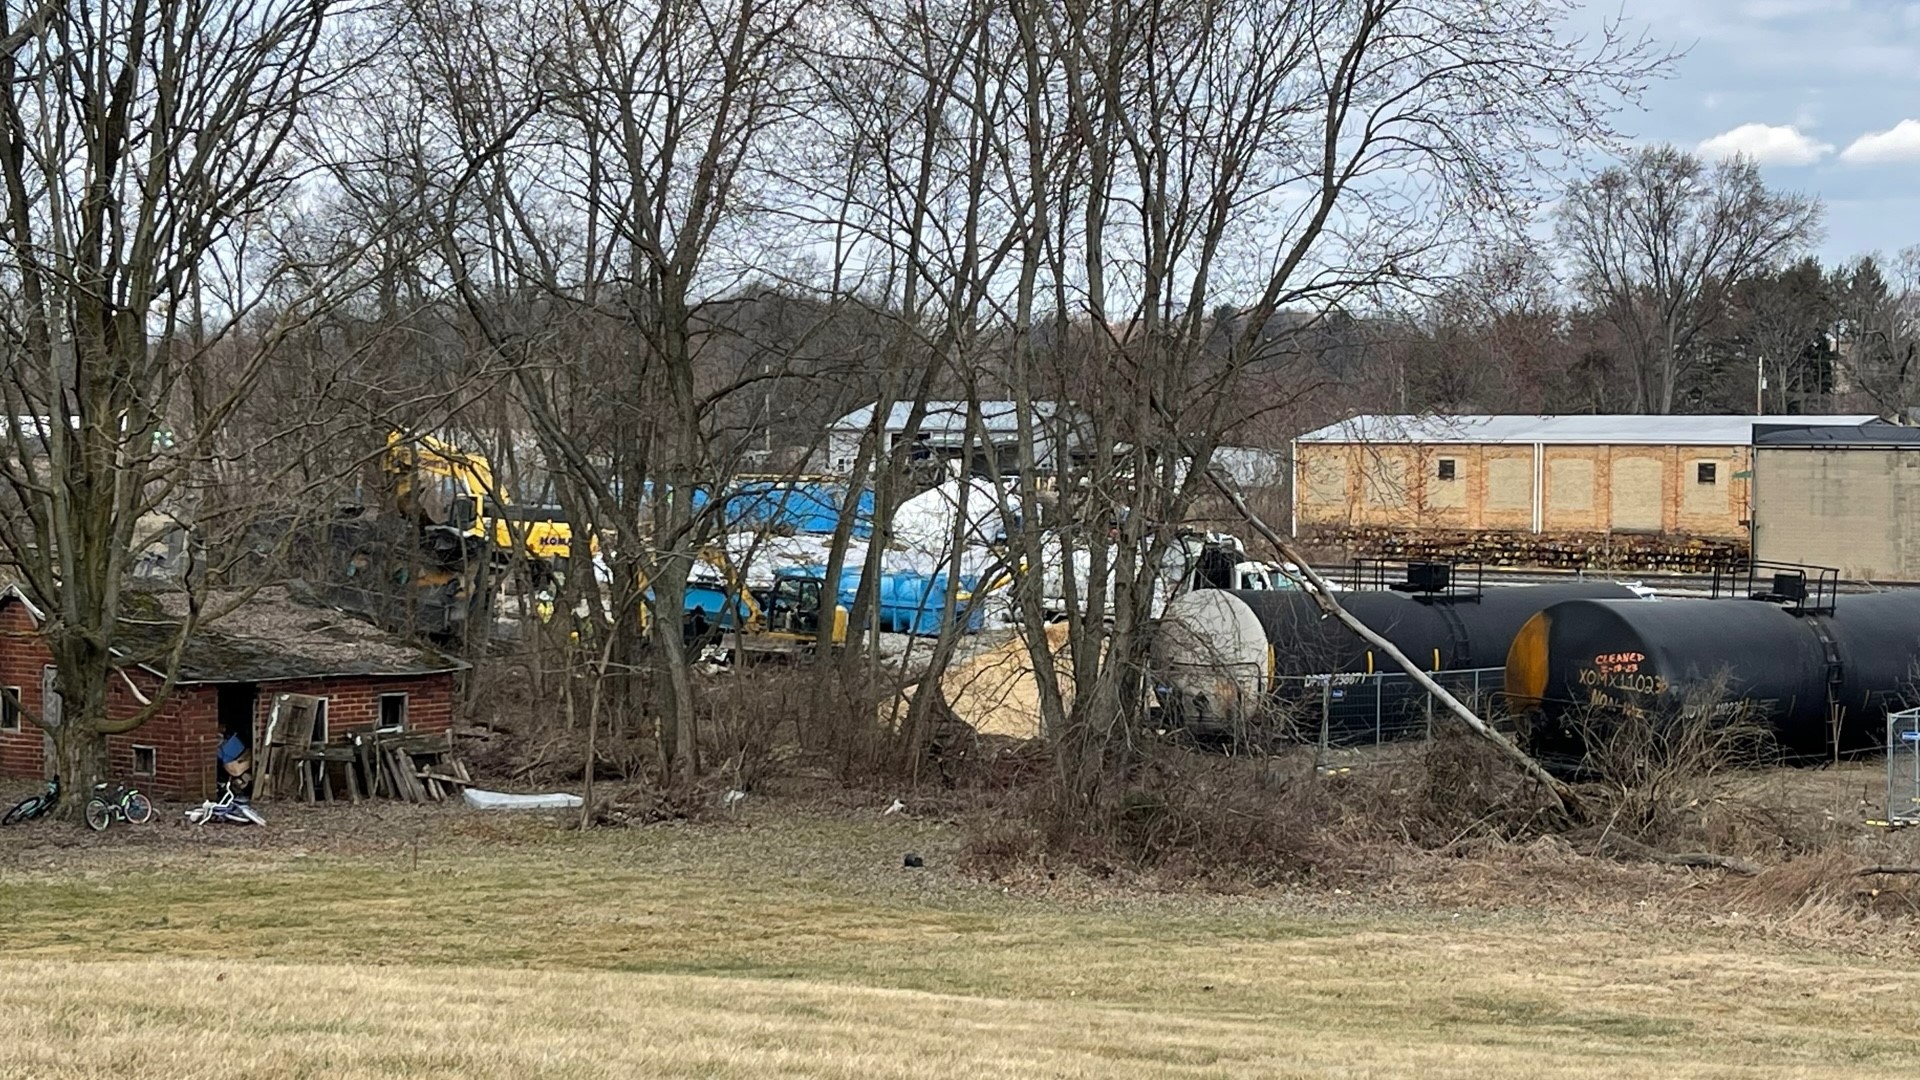 Brenda Foster's home in East Palestine is considered “ground zero” in relation to the Norfolk Southern train that derailed earlier this month.